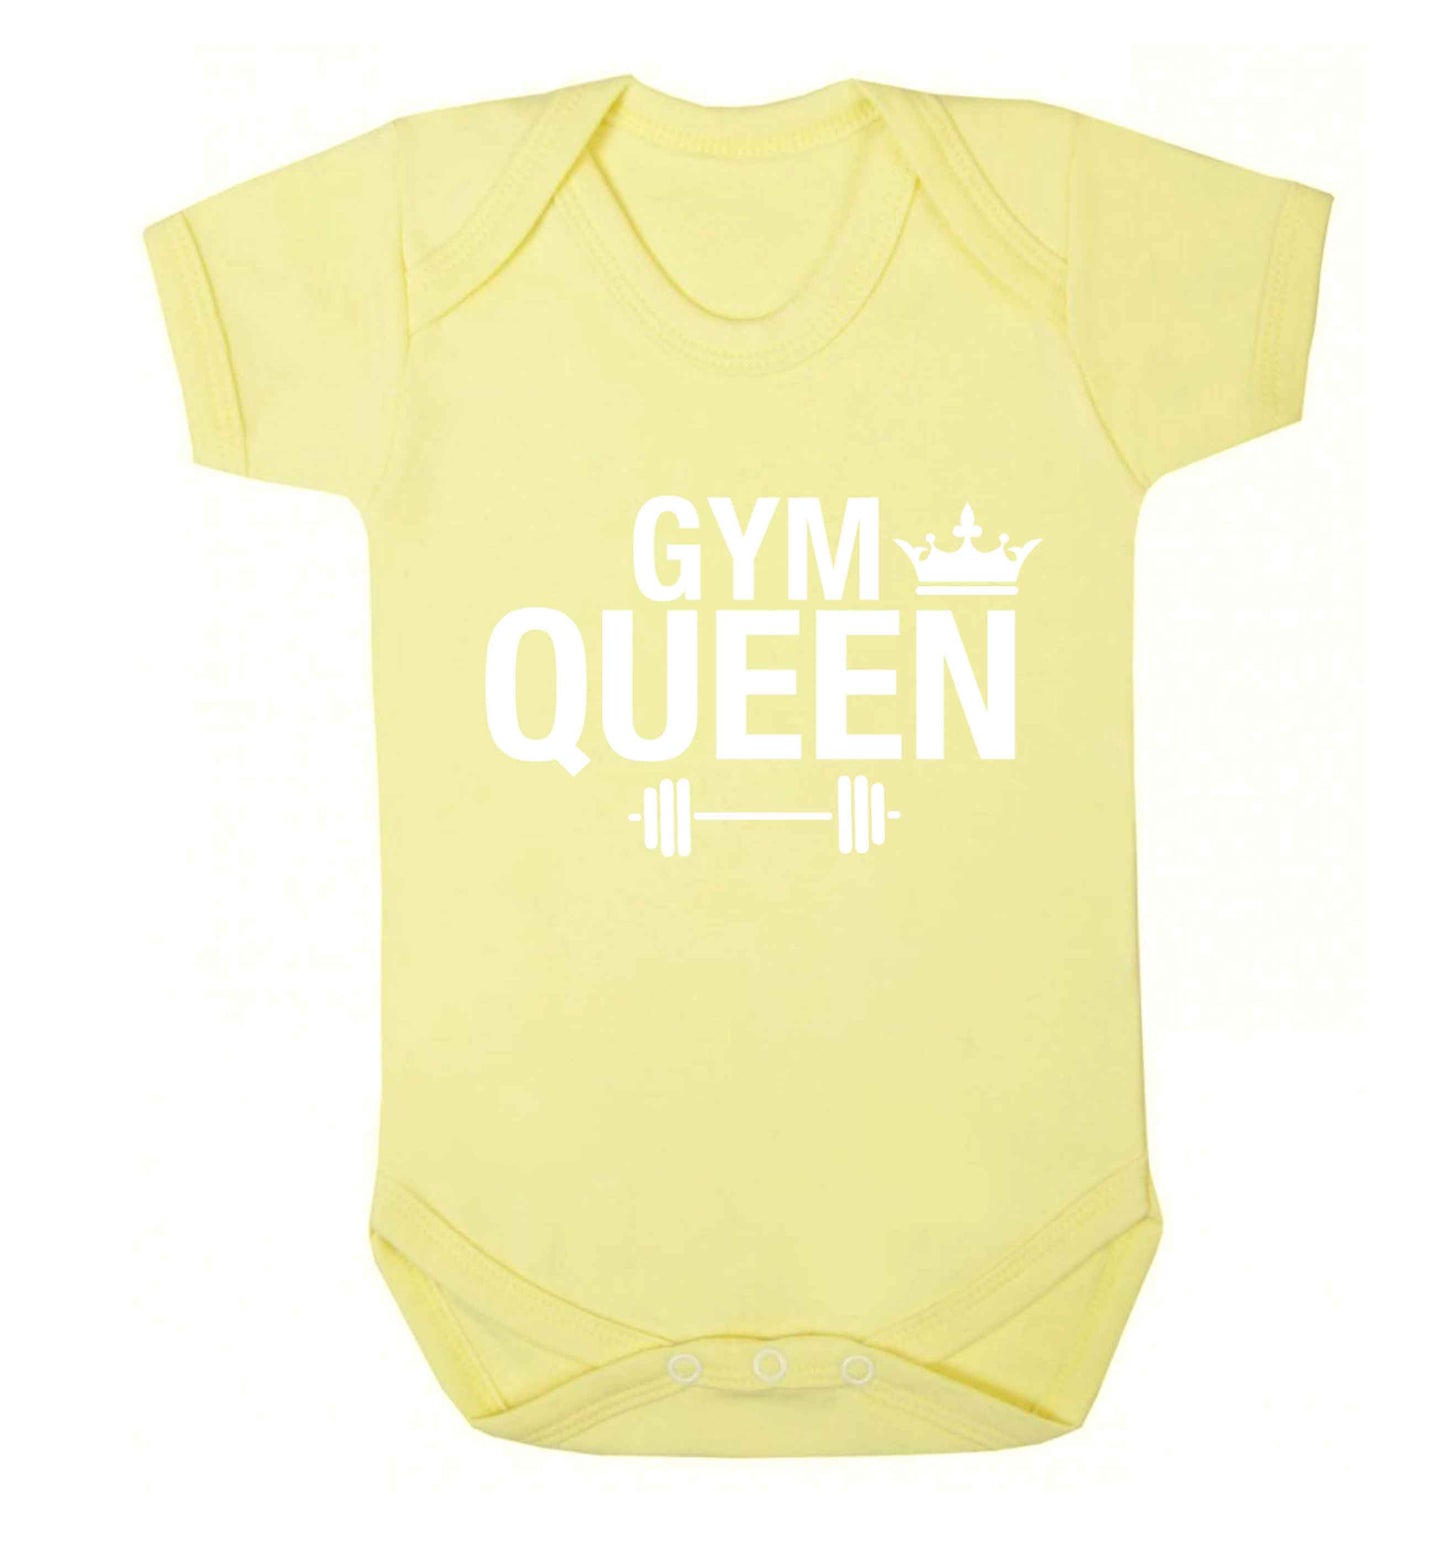 Gym queen Baby Vest pale yellow 18-24 months